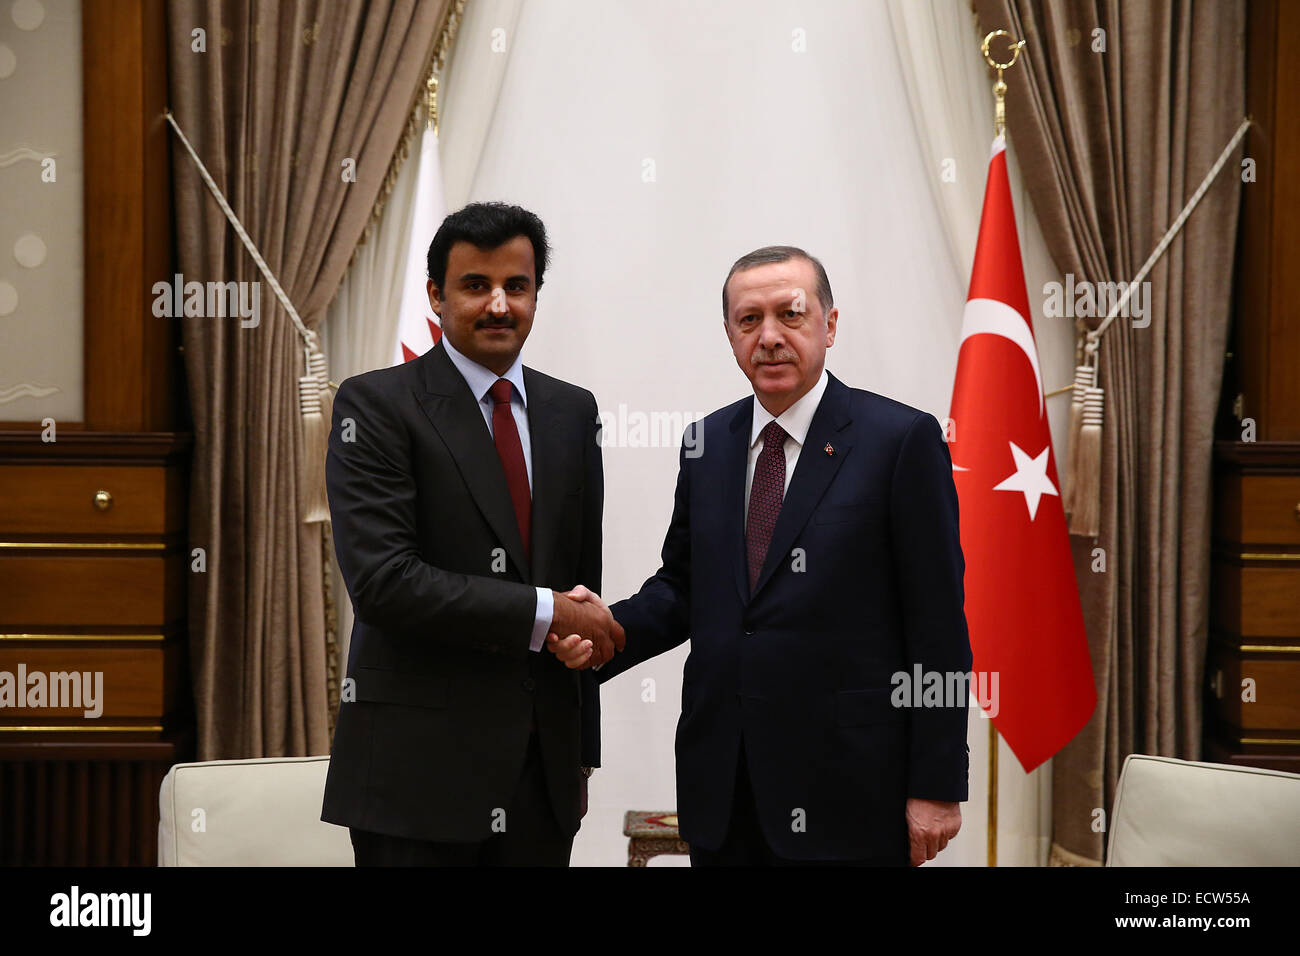 Ankara, Turkey. 19th Dec, 2014. Turkish President Recep Tayyp Erdogan (R) meets with visiting Qatar's Emir Sheikh Tamim bin Hamad Al Thani in the new Turkish Presidential Palace in Ankara, Turkey, on Dec. 19, 2014. Turkey and Qatar on Friday signed an agreement for the establishment of 'Strategic Committee' in order to intensify their already growing relations. Credit:  Turkish Presidential Palace/Xinhua/Alamy Live News Stock Photo